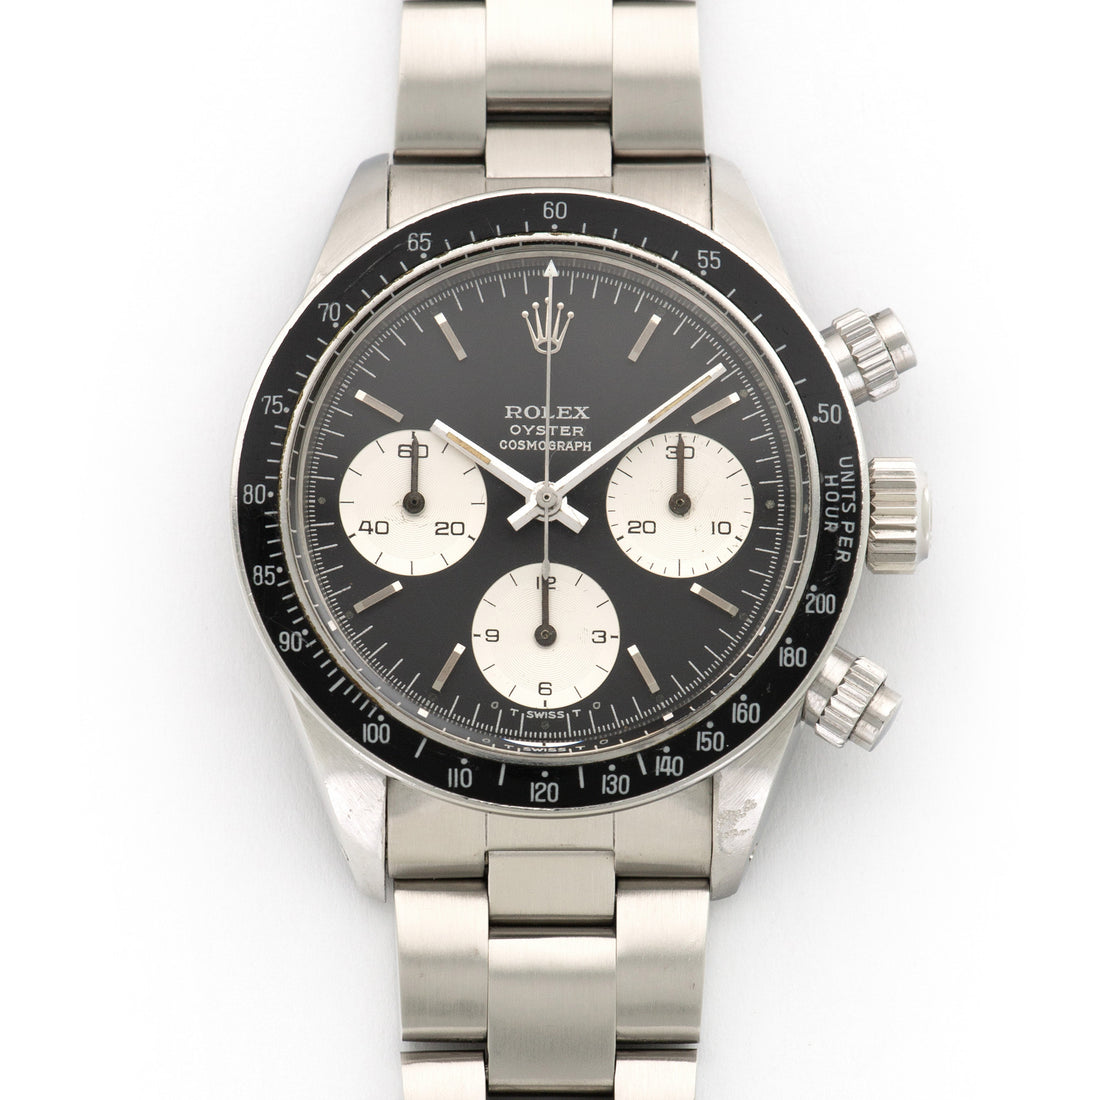 Rolex Cosmograph Daytona Watch Ref. 6263 with Military History, Sigma Dial and Original Warranty and Hangtag